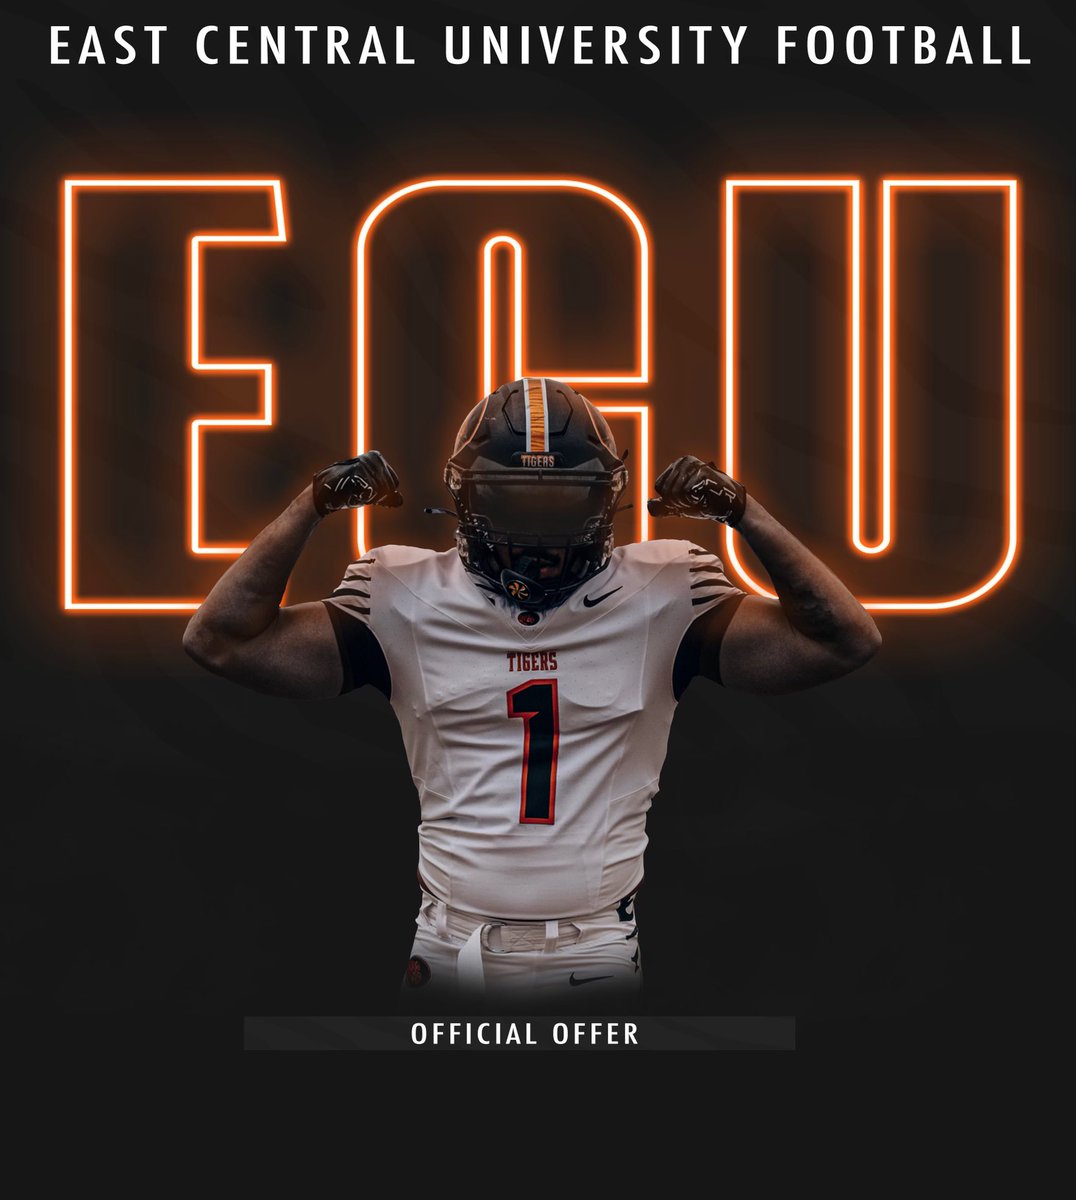 After a great conversation with @CoachIngramECU. I am blessed to have received my first offer from @ECUTigersFB. I am blessed to have received this opportunity!